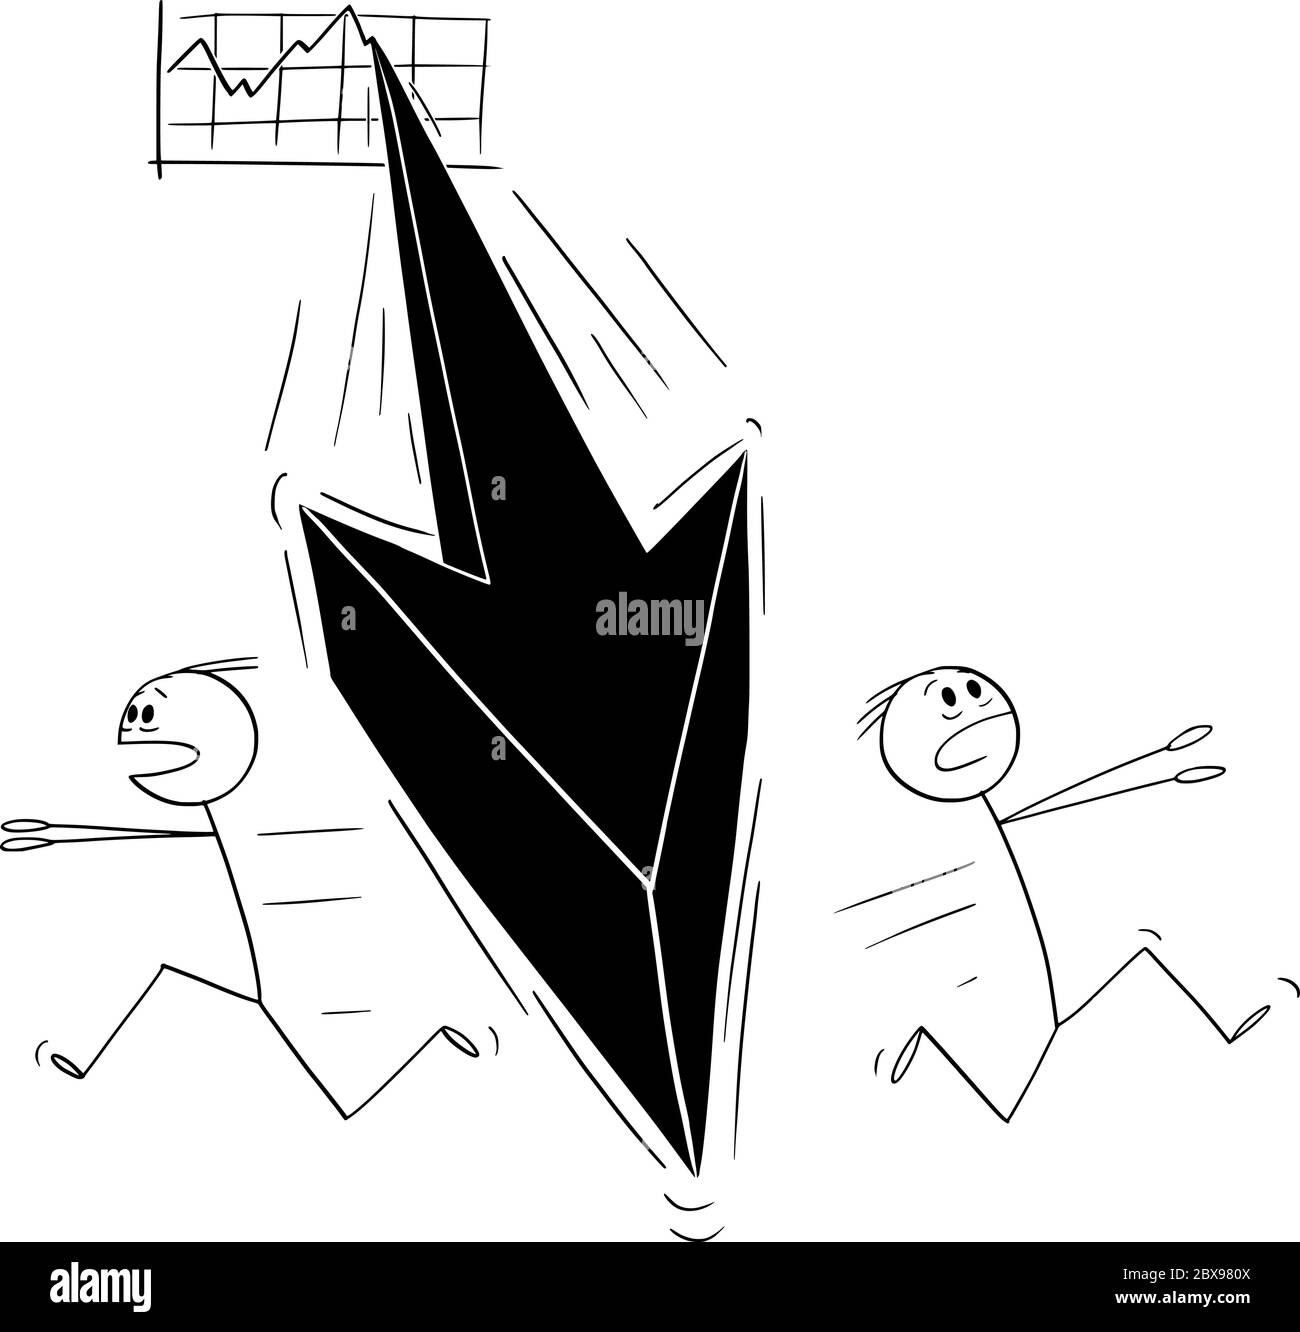 Vector cartoon stick figure drawing conceptual illustration of two men or businessmen running away in panic from the falling financial graph arrow. Crisis or recession concept. Stock Vector